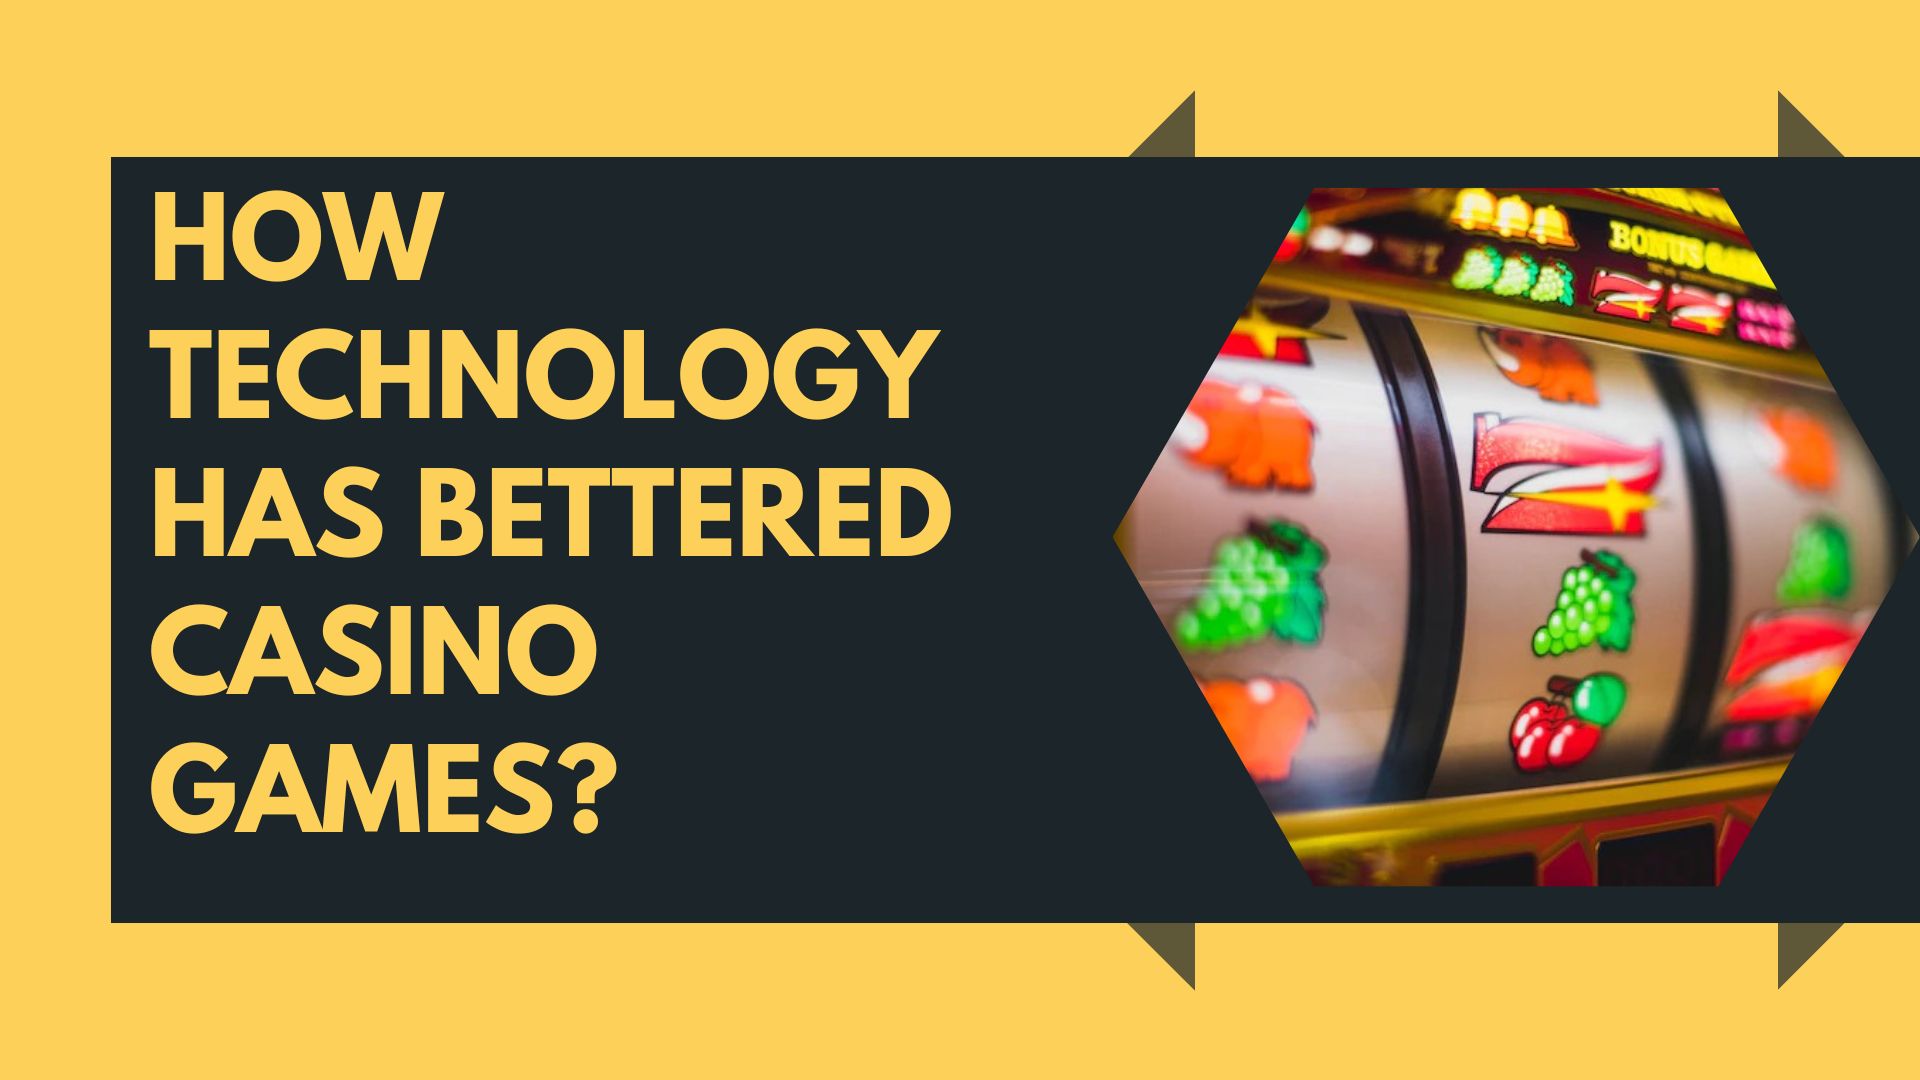 How Technology has bettered Casino Games?